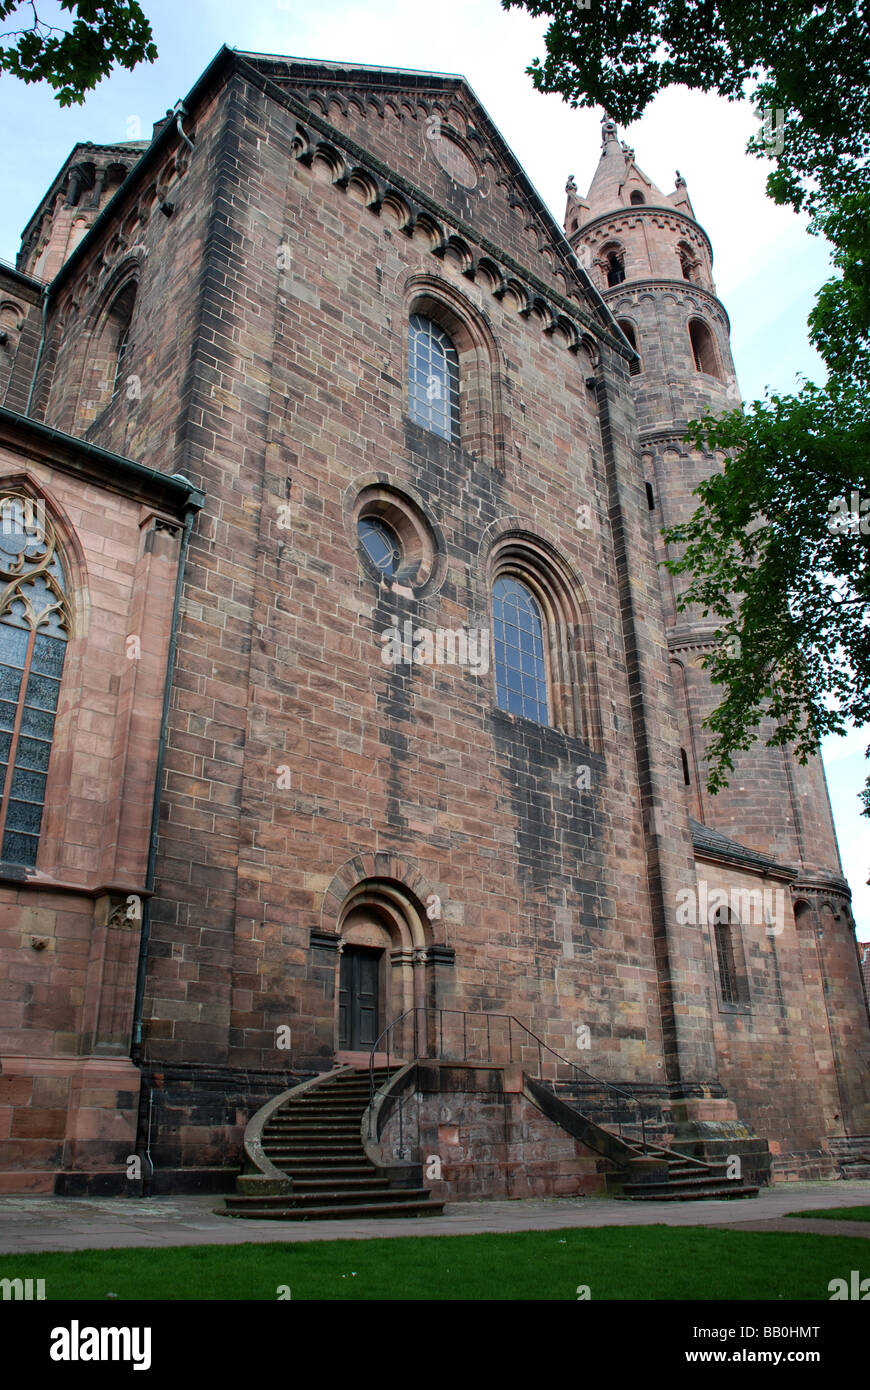 St Peter's Cathedral, Worms, Germany. Stock Photo